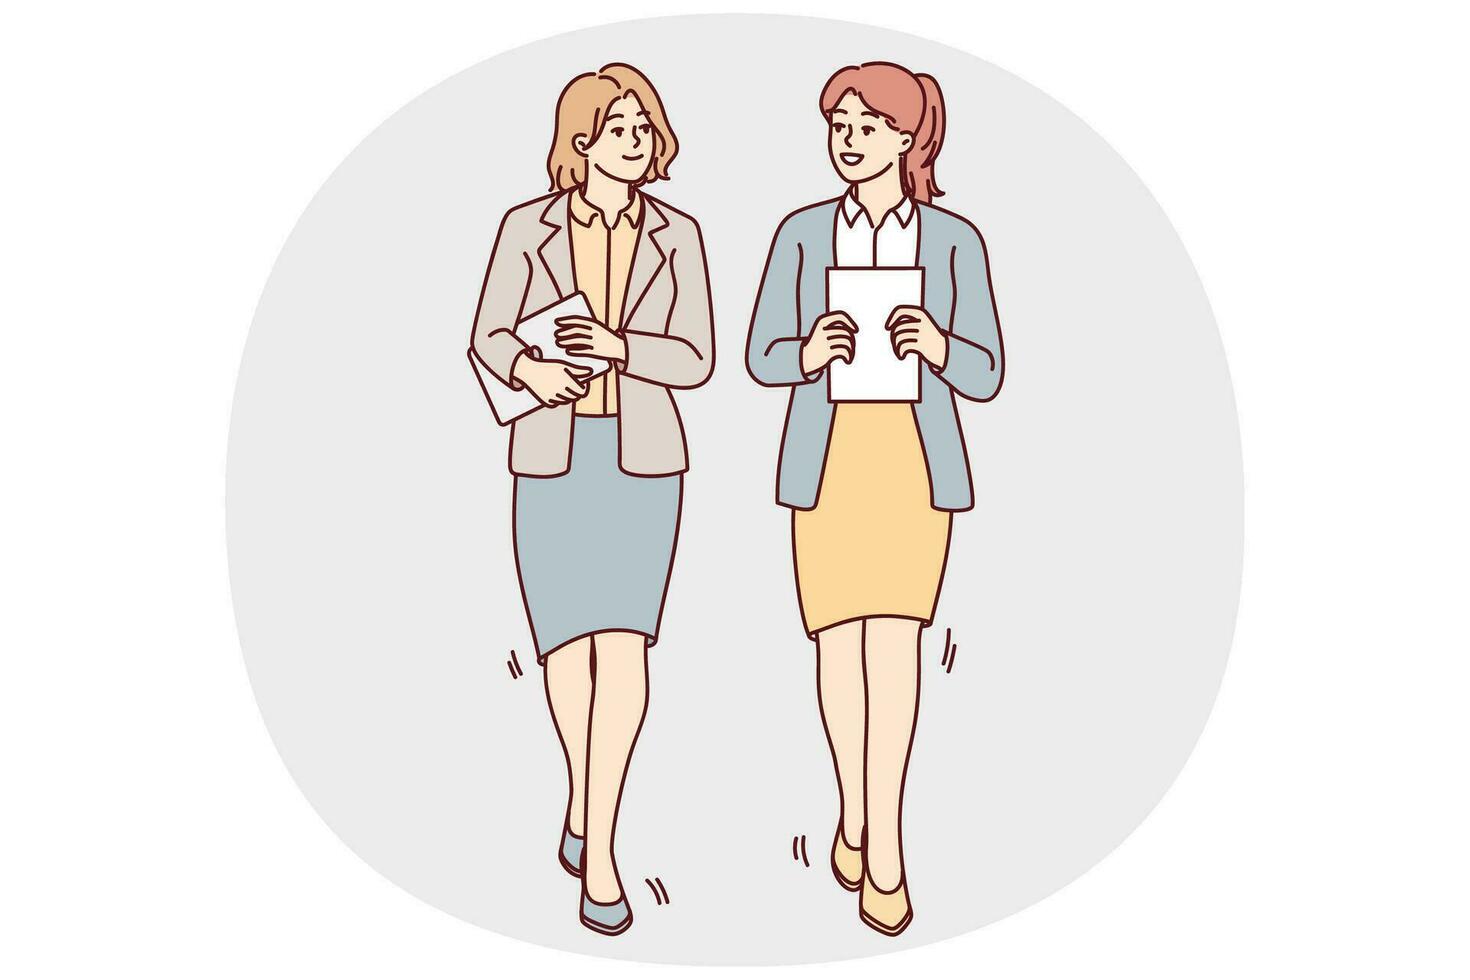 Businesswomen walking together talking discussing business ideas. Female employees with documents or paperwork in hands walk chatting. Vector illustration.